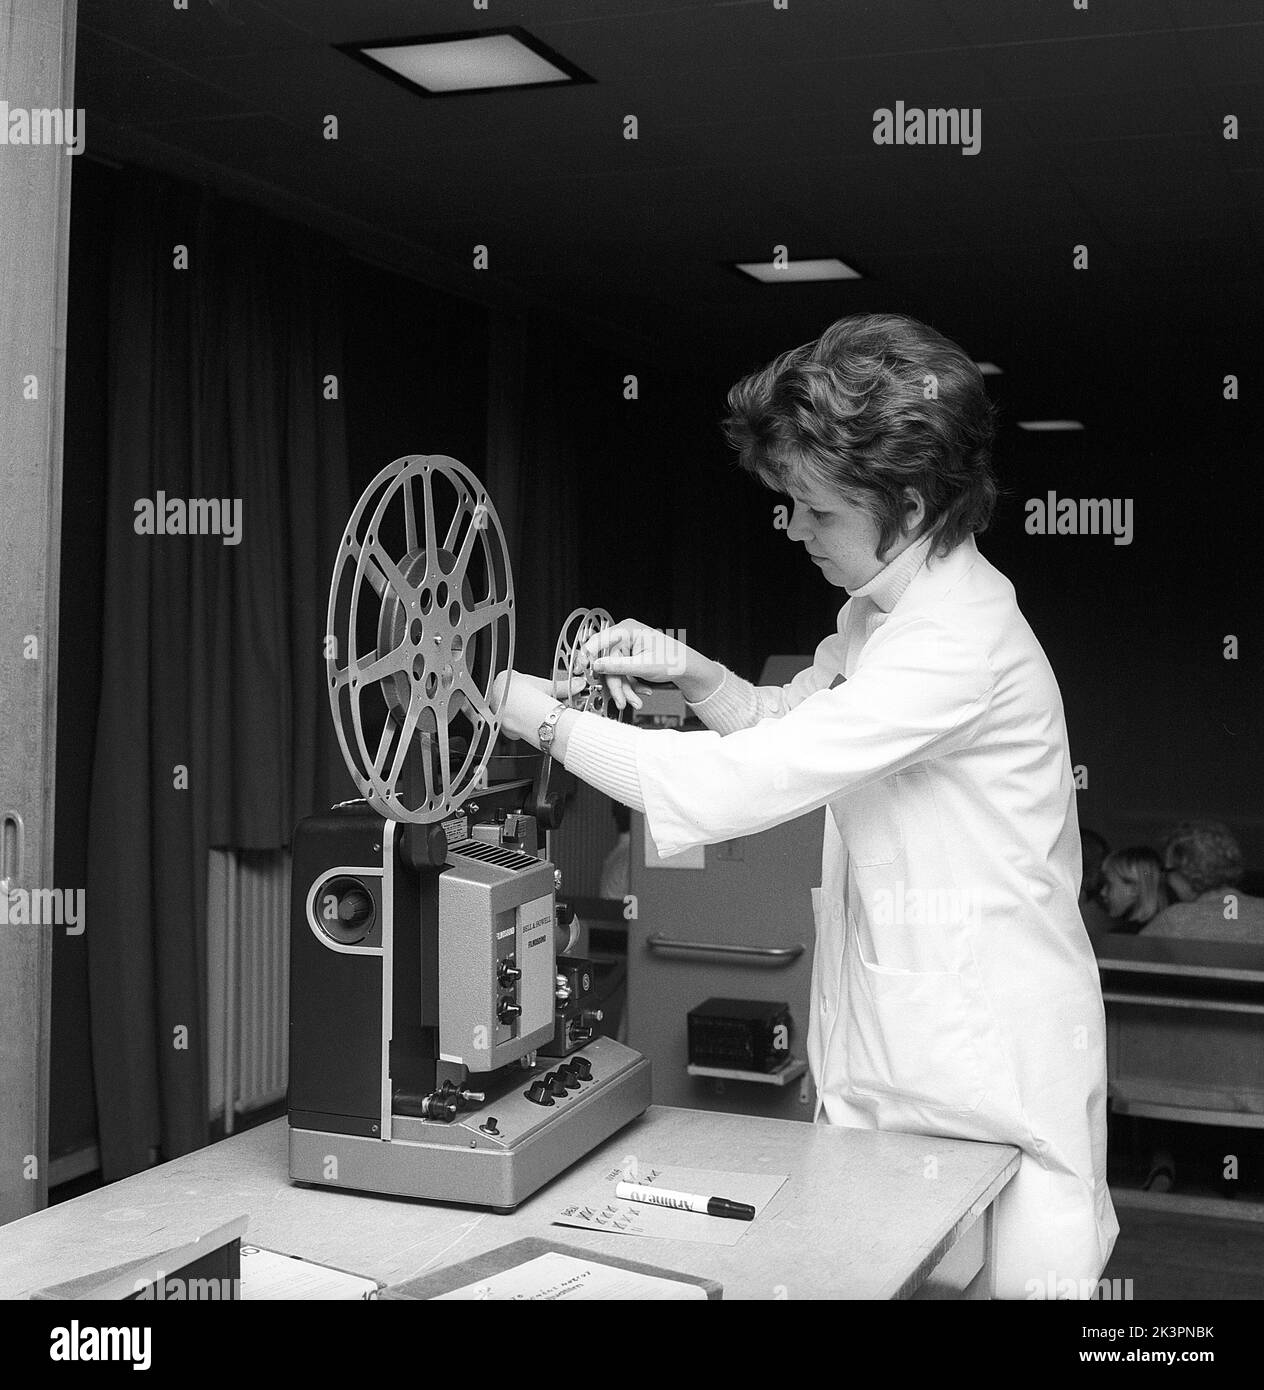 In the 1960s. A young female teacher with a film projector, mounting the film roll. Sometimes short films were shown in the classroom or in a special viewing room, not only for educational puroposes but for entertainment. The film had sound. Once the film roll was viewed, the film was rolled onto a reciever roll and needed to be winded back. Sweden 1968 ref CV77 Stock Photo